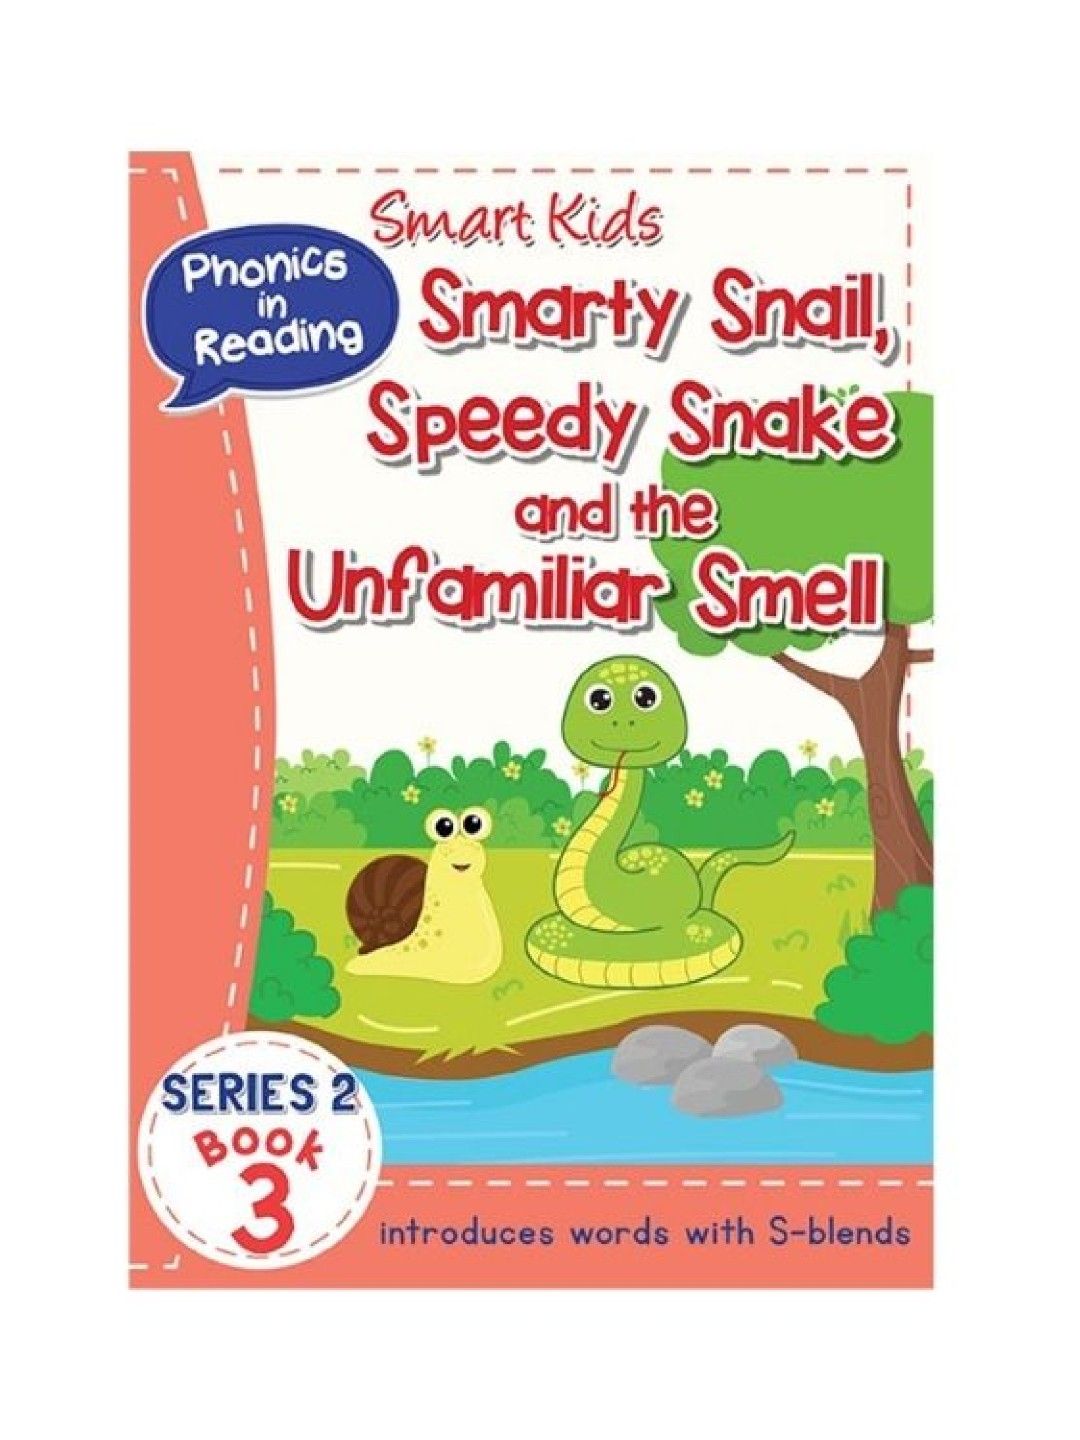 Learning is Fun Smart Kids Phonics In Reading Series 2 Book 3